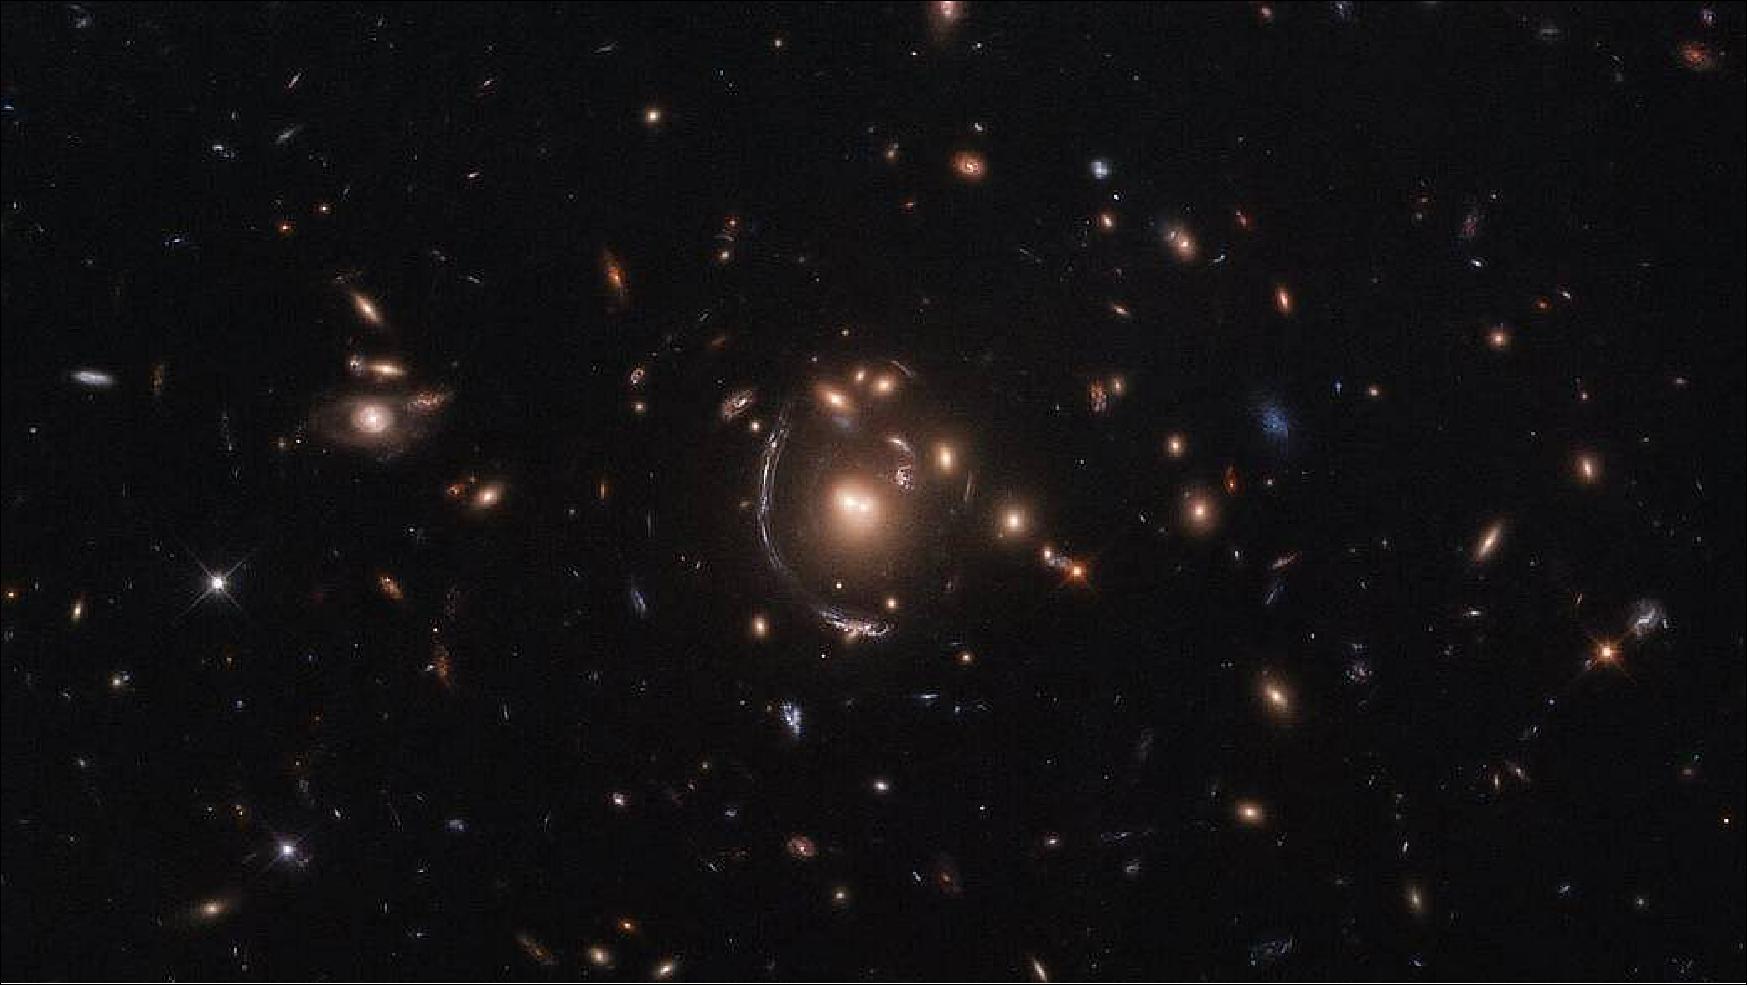 Figure 13: This NASA/ESA Hubble Space Telescope image features the galaxy LRG-3-817, also known as SDSS J090122.37+181432.3. The galaxy, its image distorted by the effects of gravitational lensing, appears as a long arc to the left of the central galaxy cluster (image credit: ESA/Hubble & NASA, S. Allam et al.)